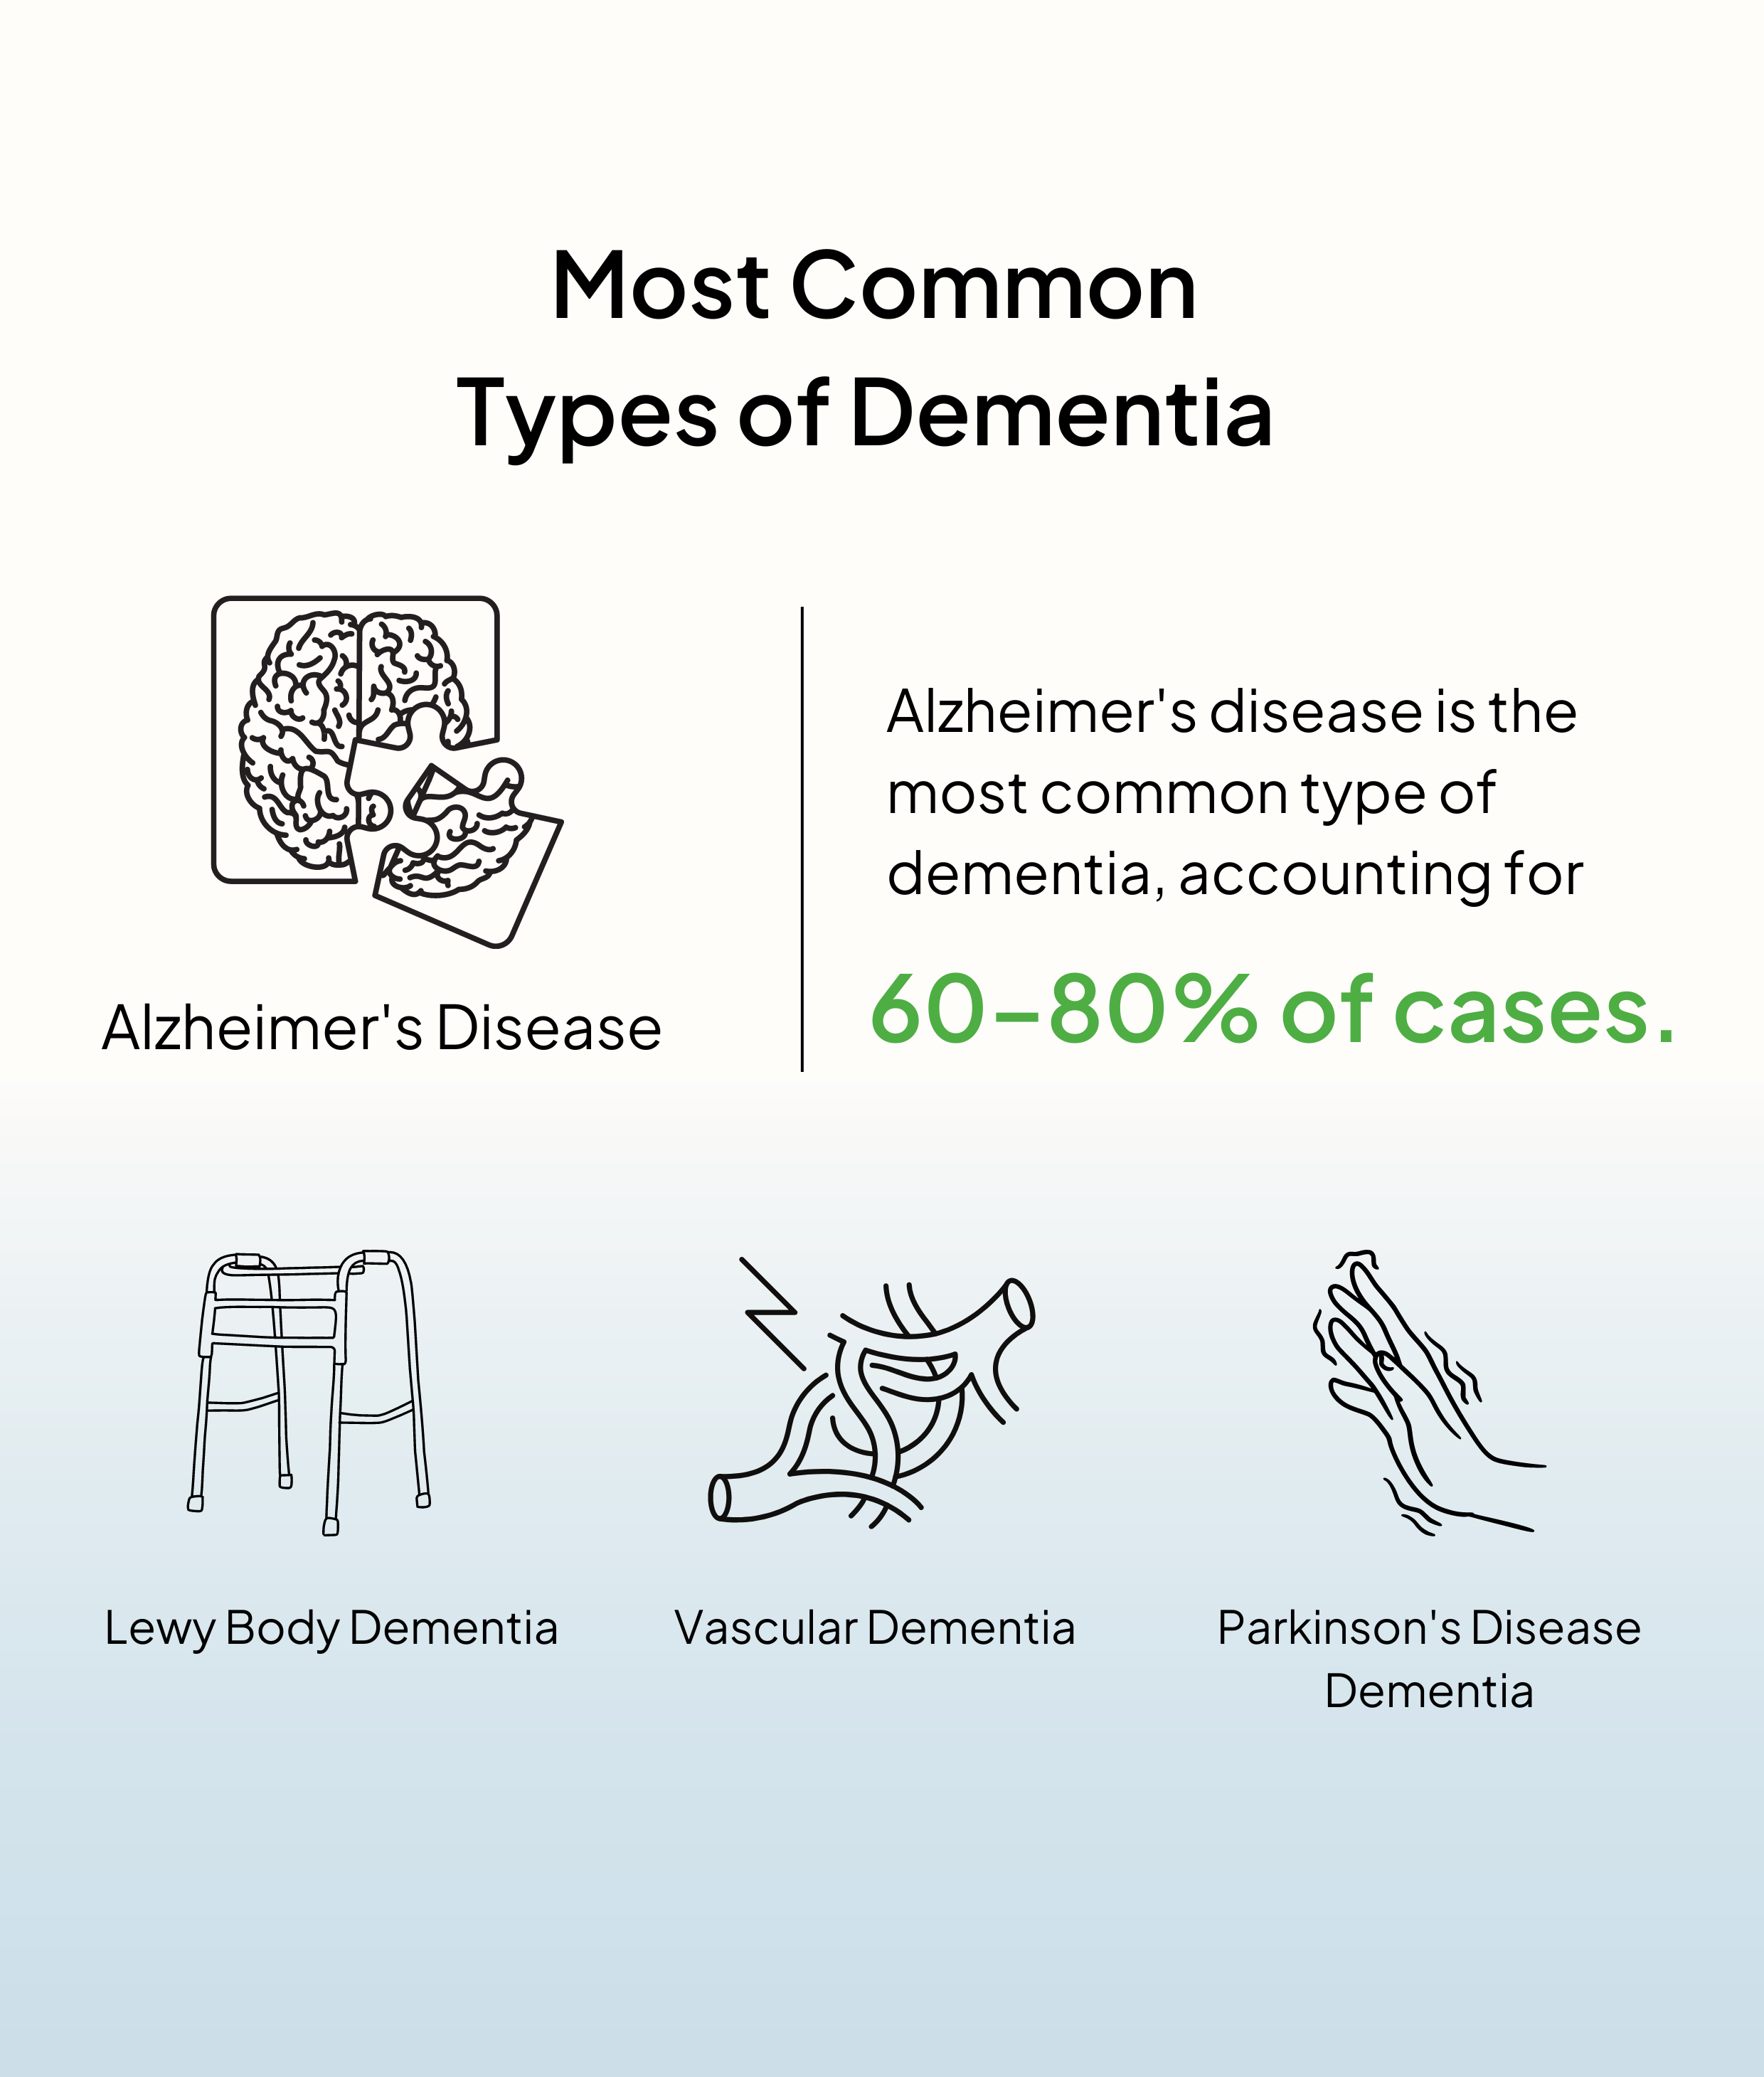 icons showing the most common types of dementia